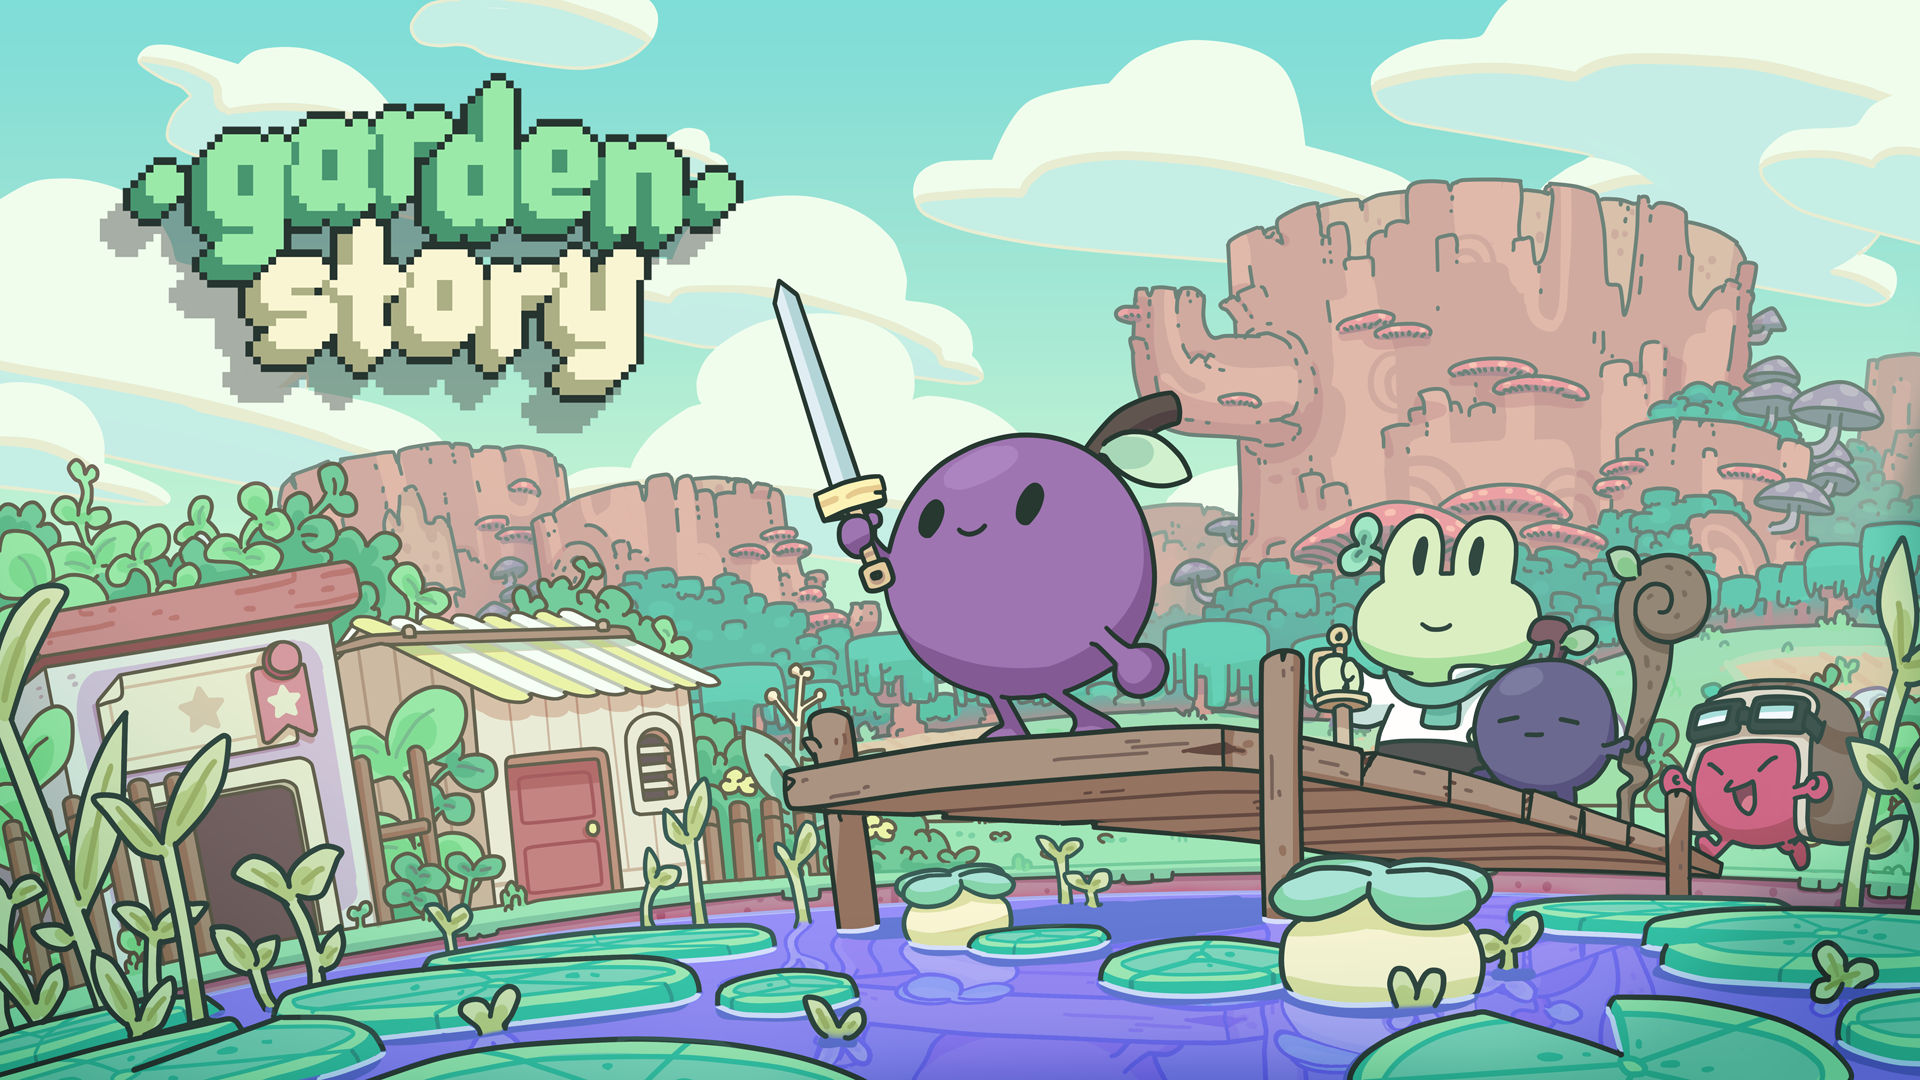 the official art for Garden Story. a grape with arms and legs named Concord stands on a dock and holds a sword up to the sky. behind them are buildings, giant tree stumps, and other characters in the game